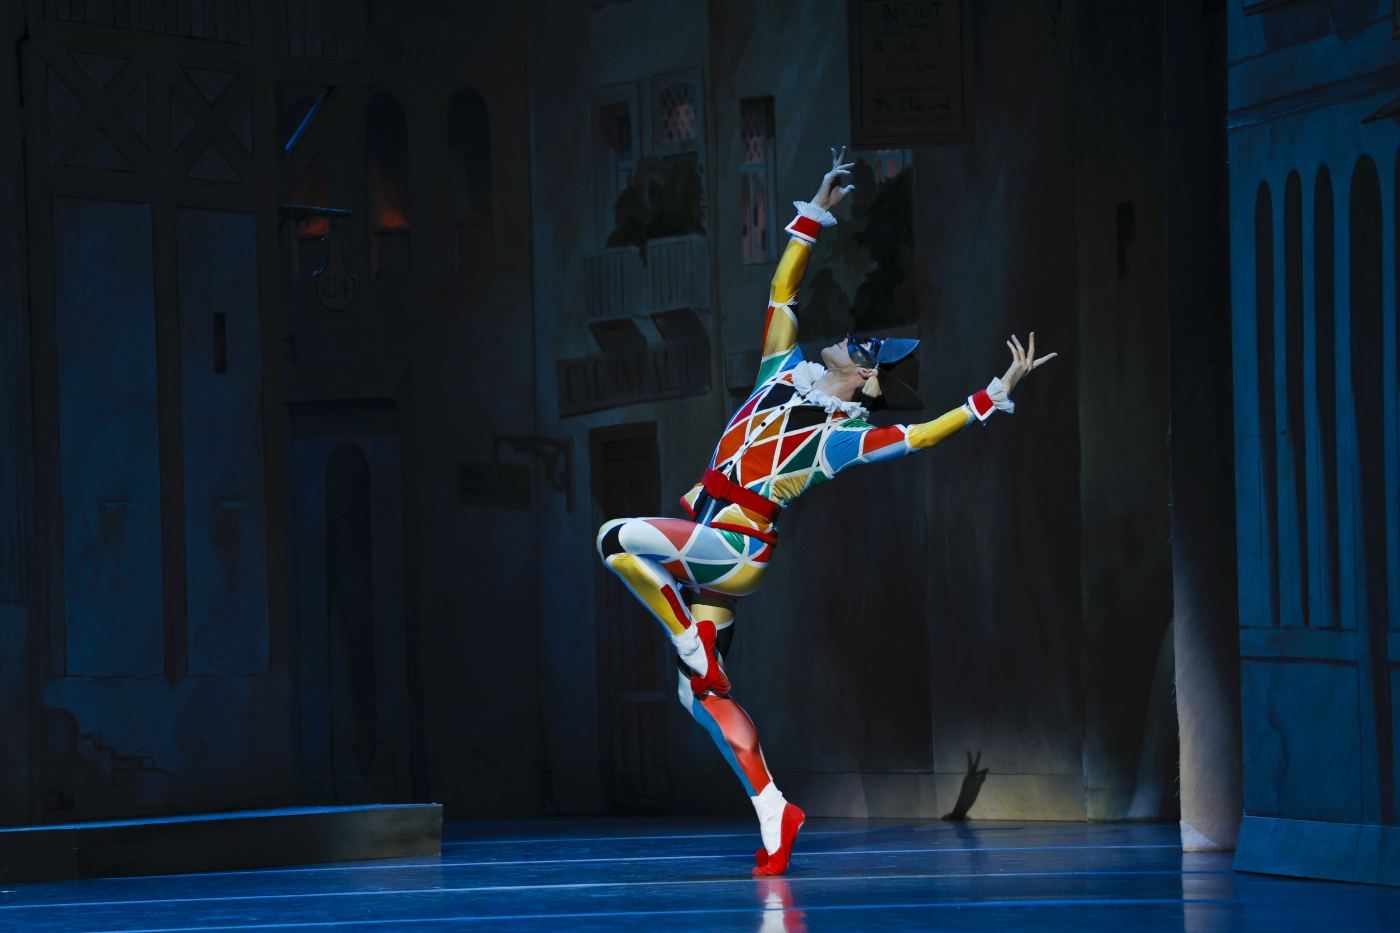 3. B.Chynoweth (Harlequin), “Harlequinade” by M.Petipa, additional choreography by A.Ratmansky; The Australian Ballet 2022 © J.Busby